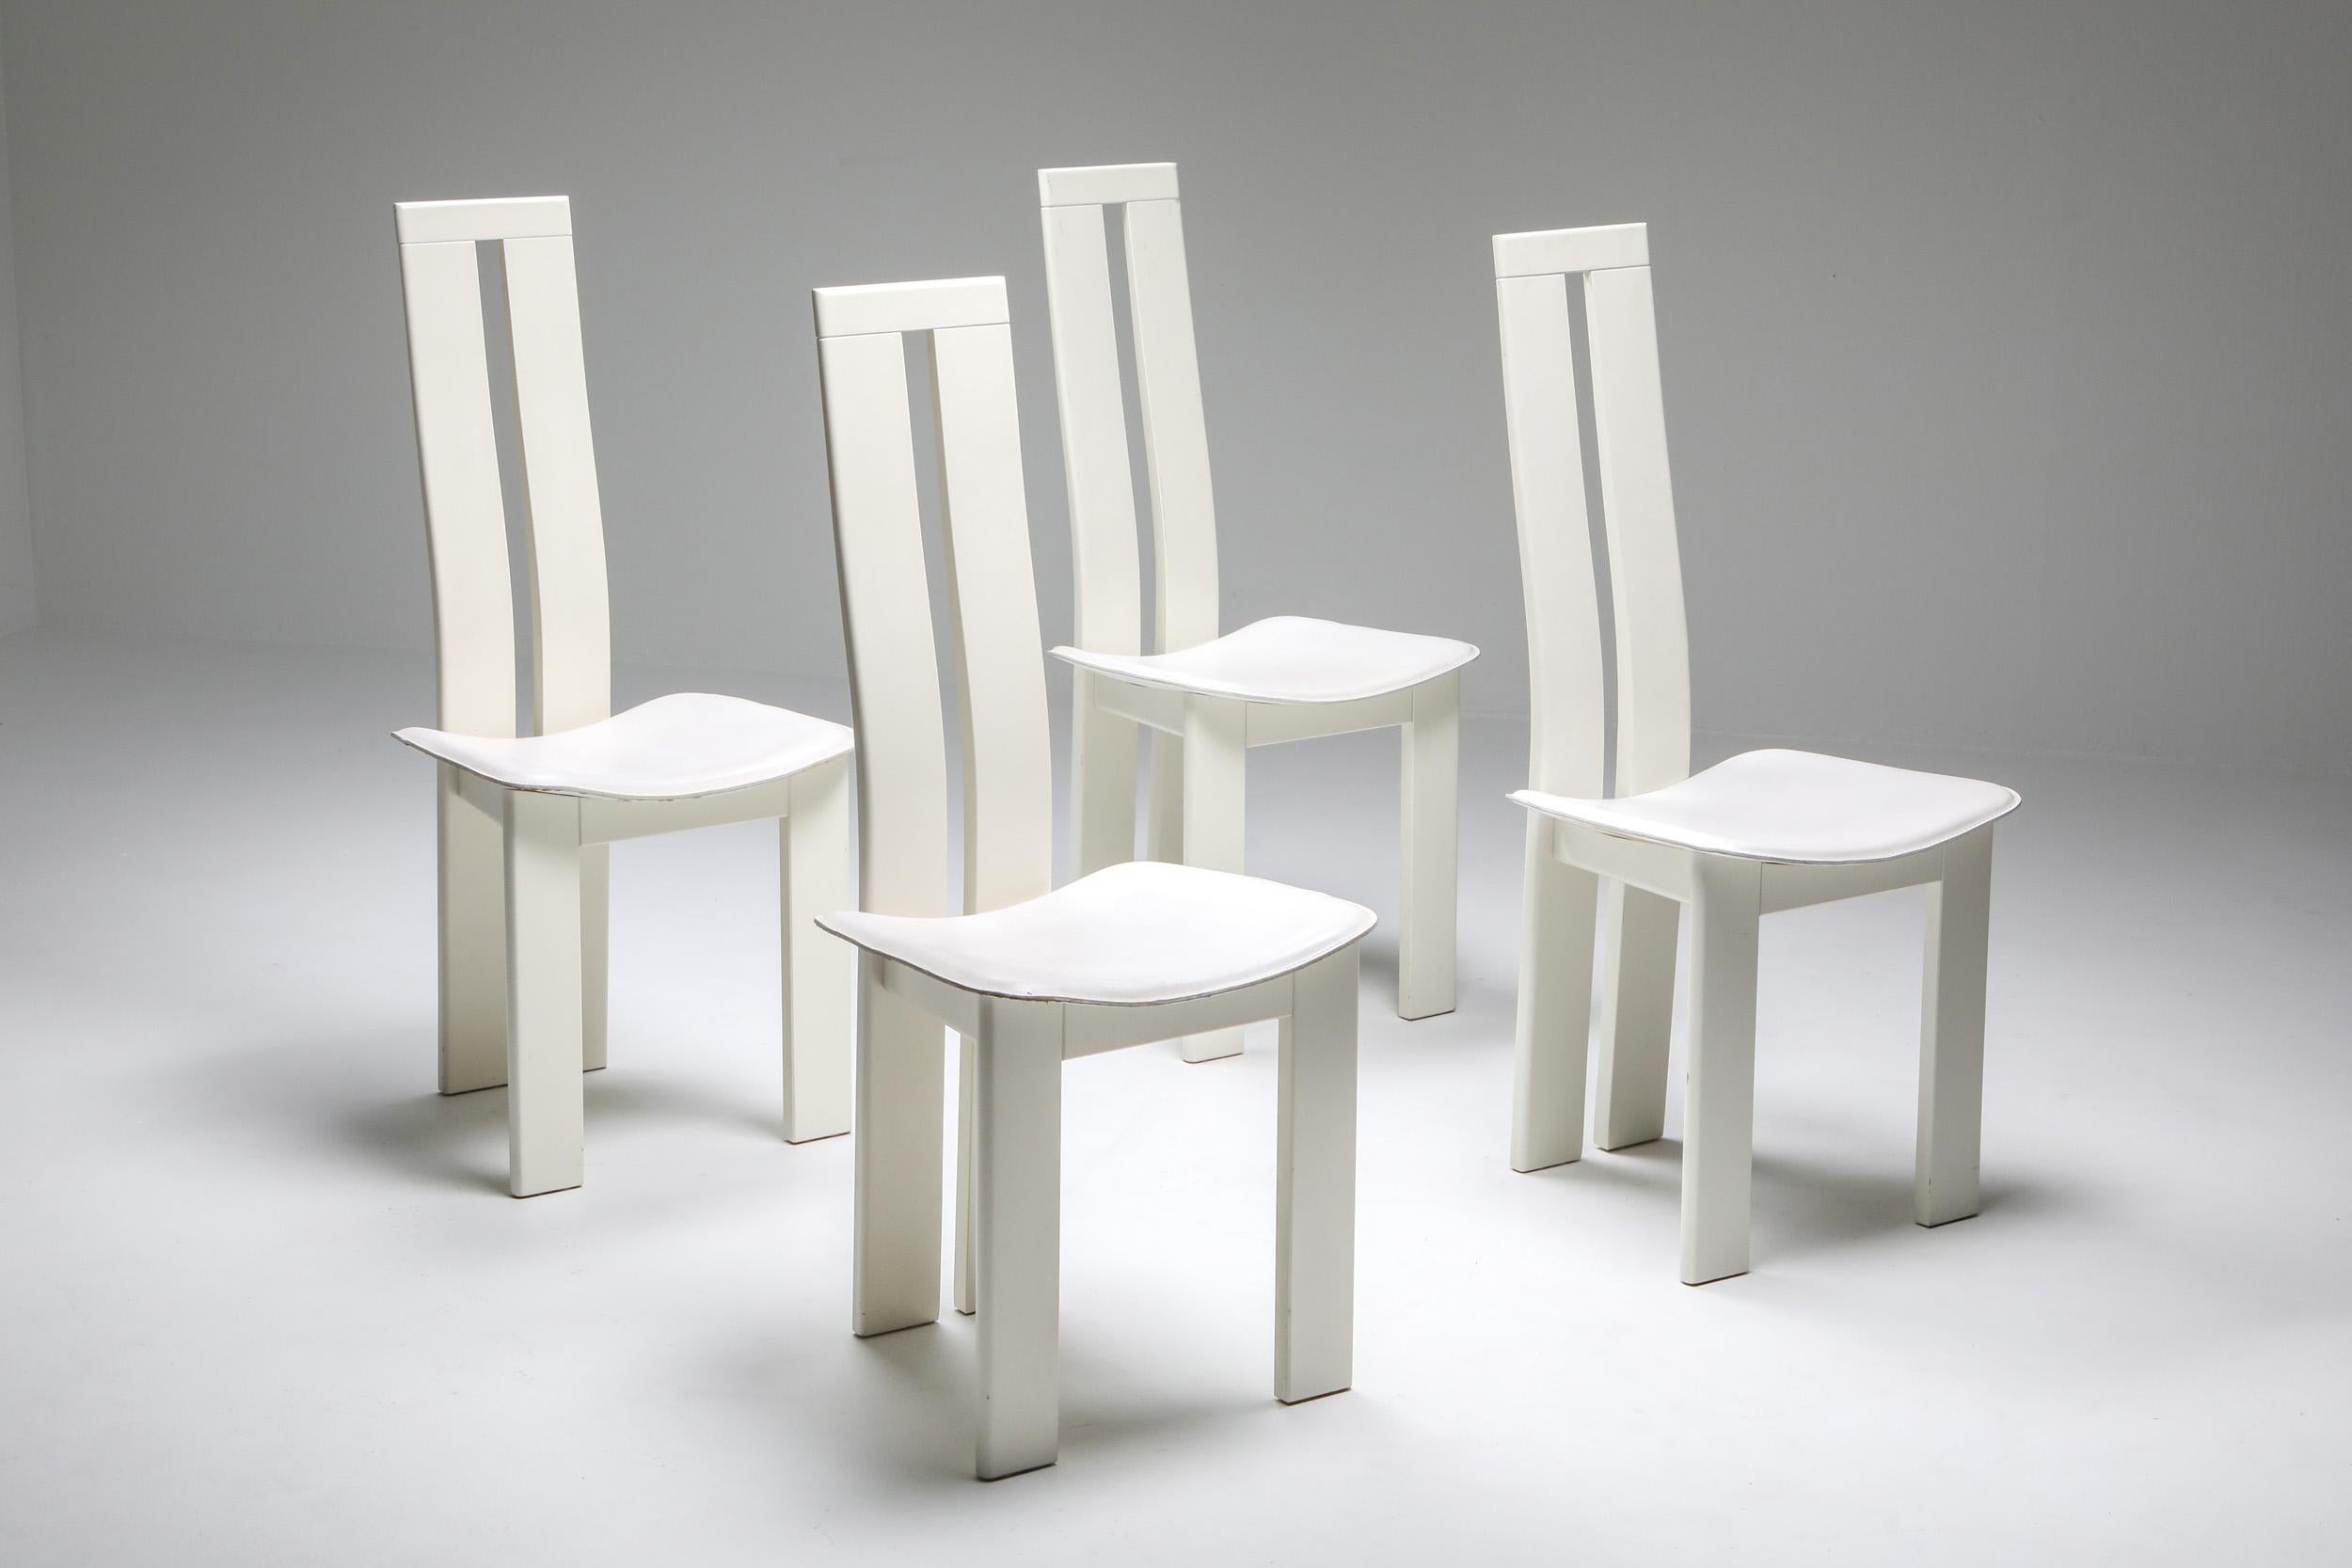 White Postmodern dining chairs by Pietro Costantini, Italy, 1980s.